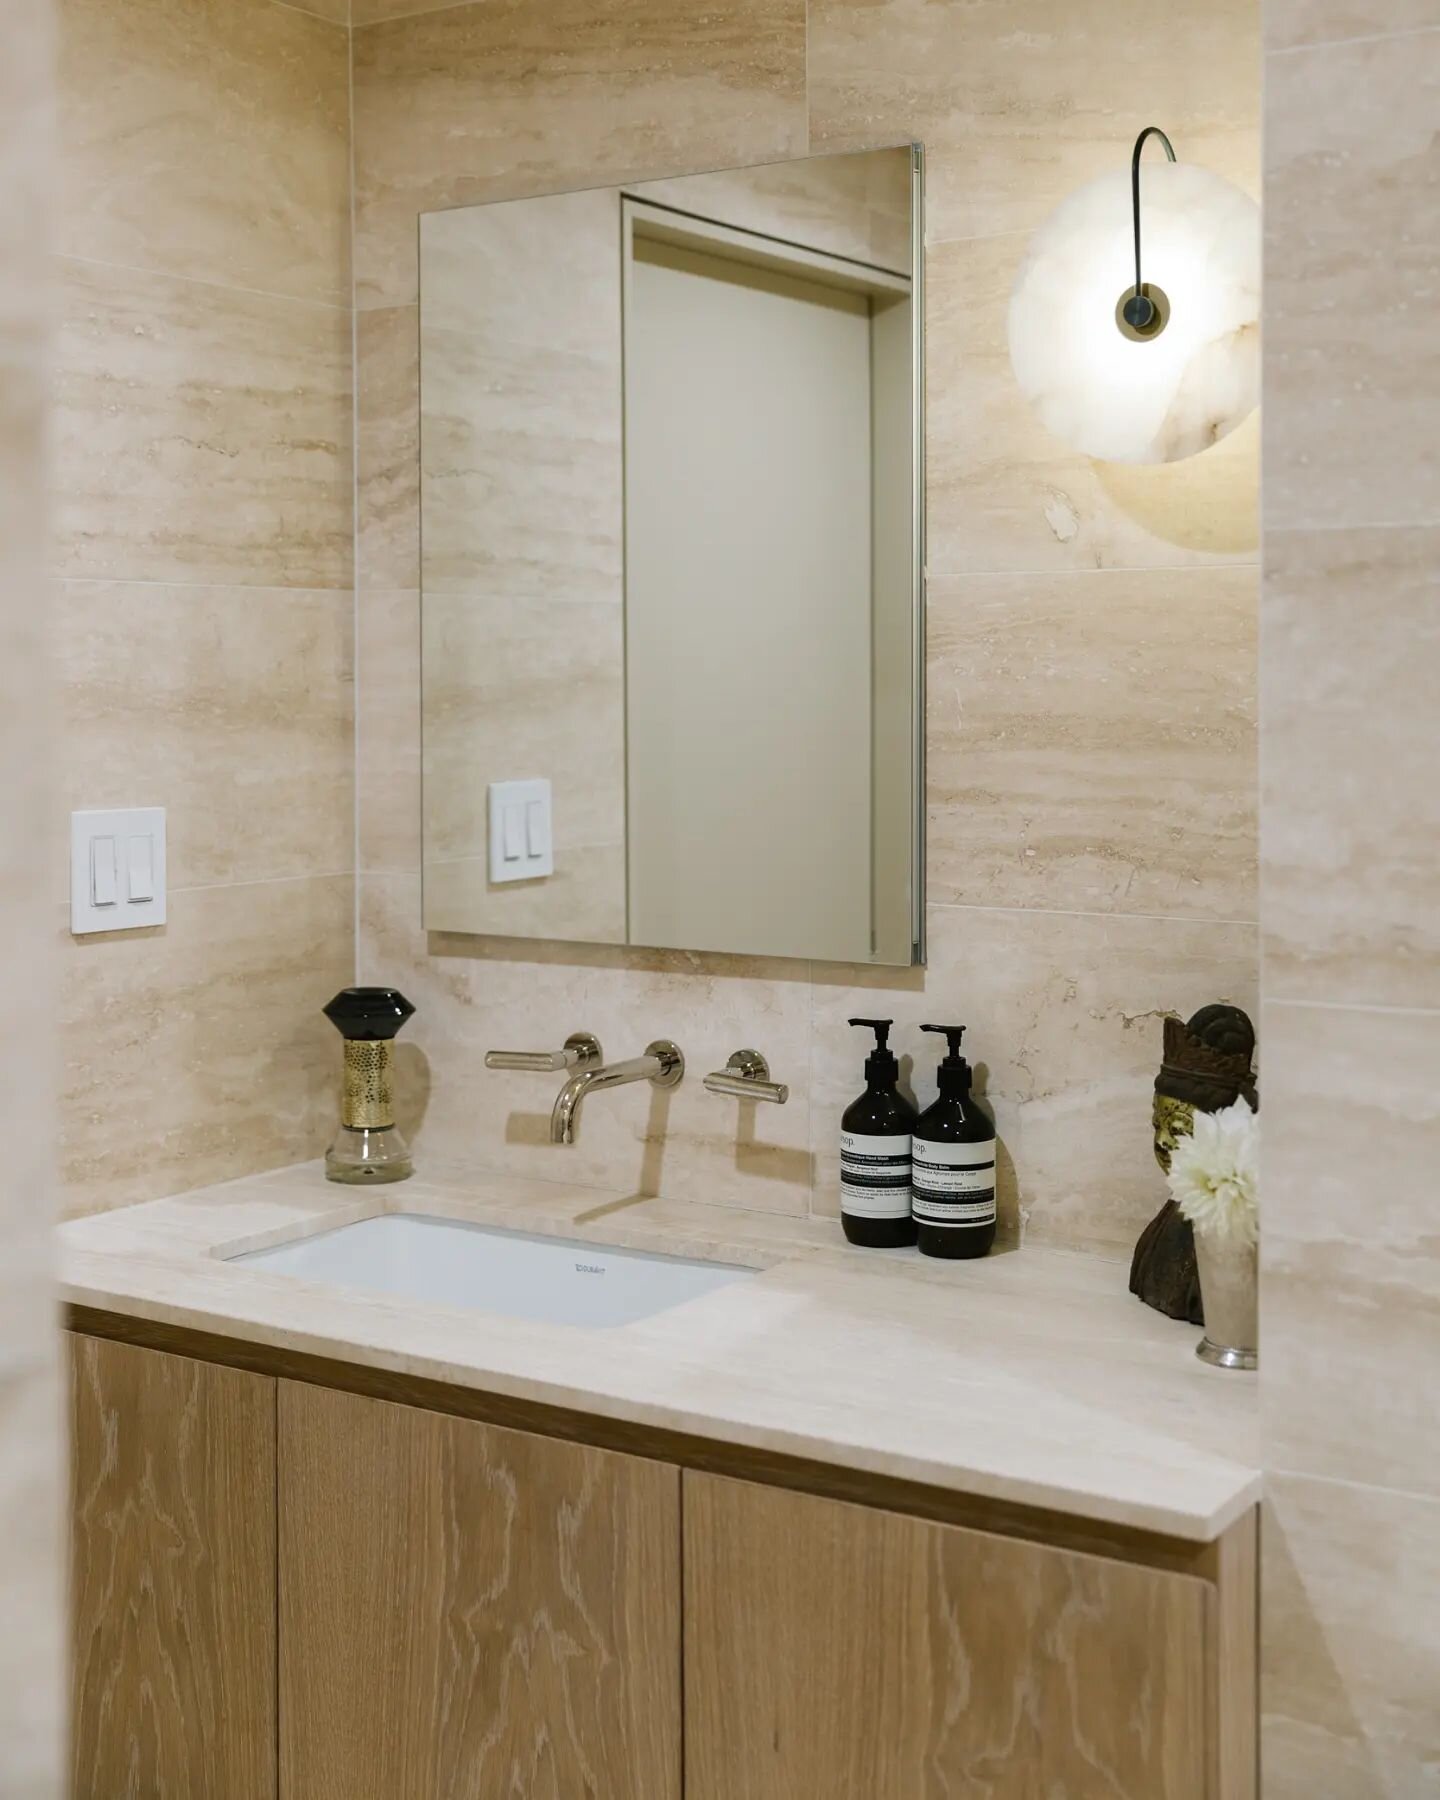 Full-wall travertine in the main bathroom gives a classic, calming feel. Lower Fifth Ave Apartment 📸@nickglimenakis 

#janekimarchitect #architecture #interiordesign #renovation #nyc #apartment #bathroom #travertine